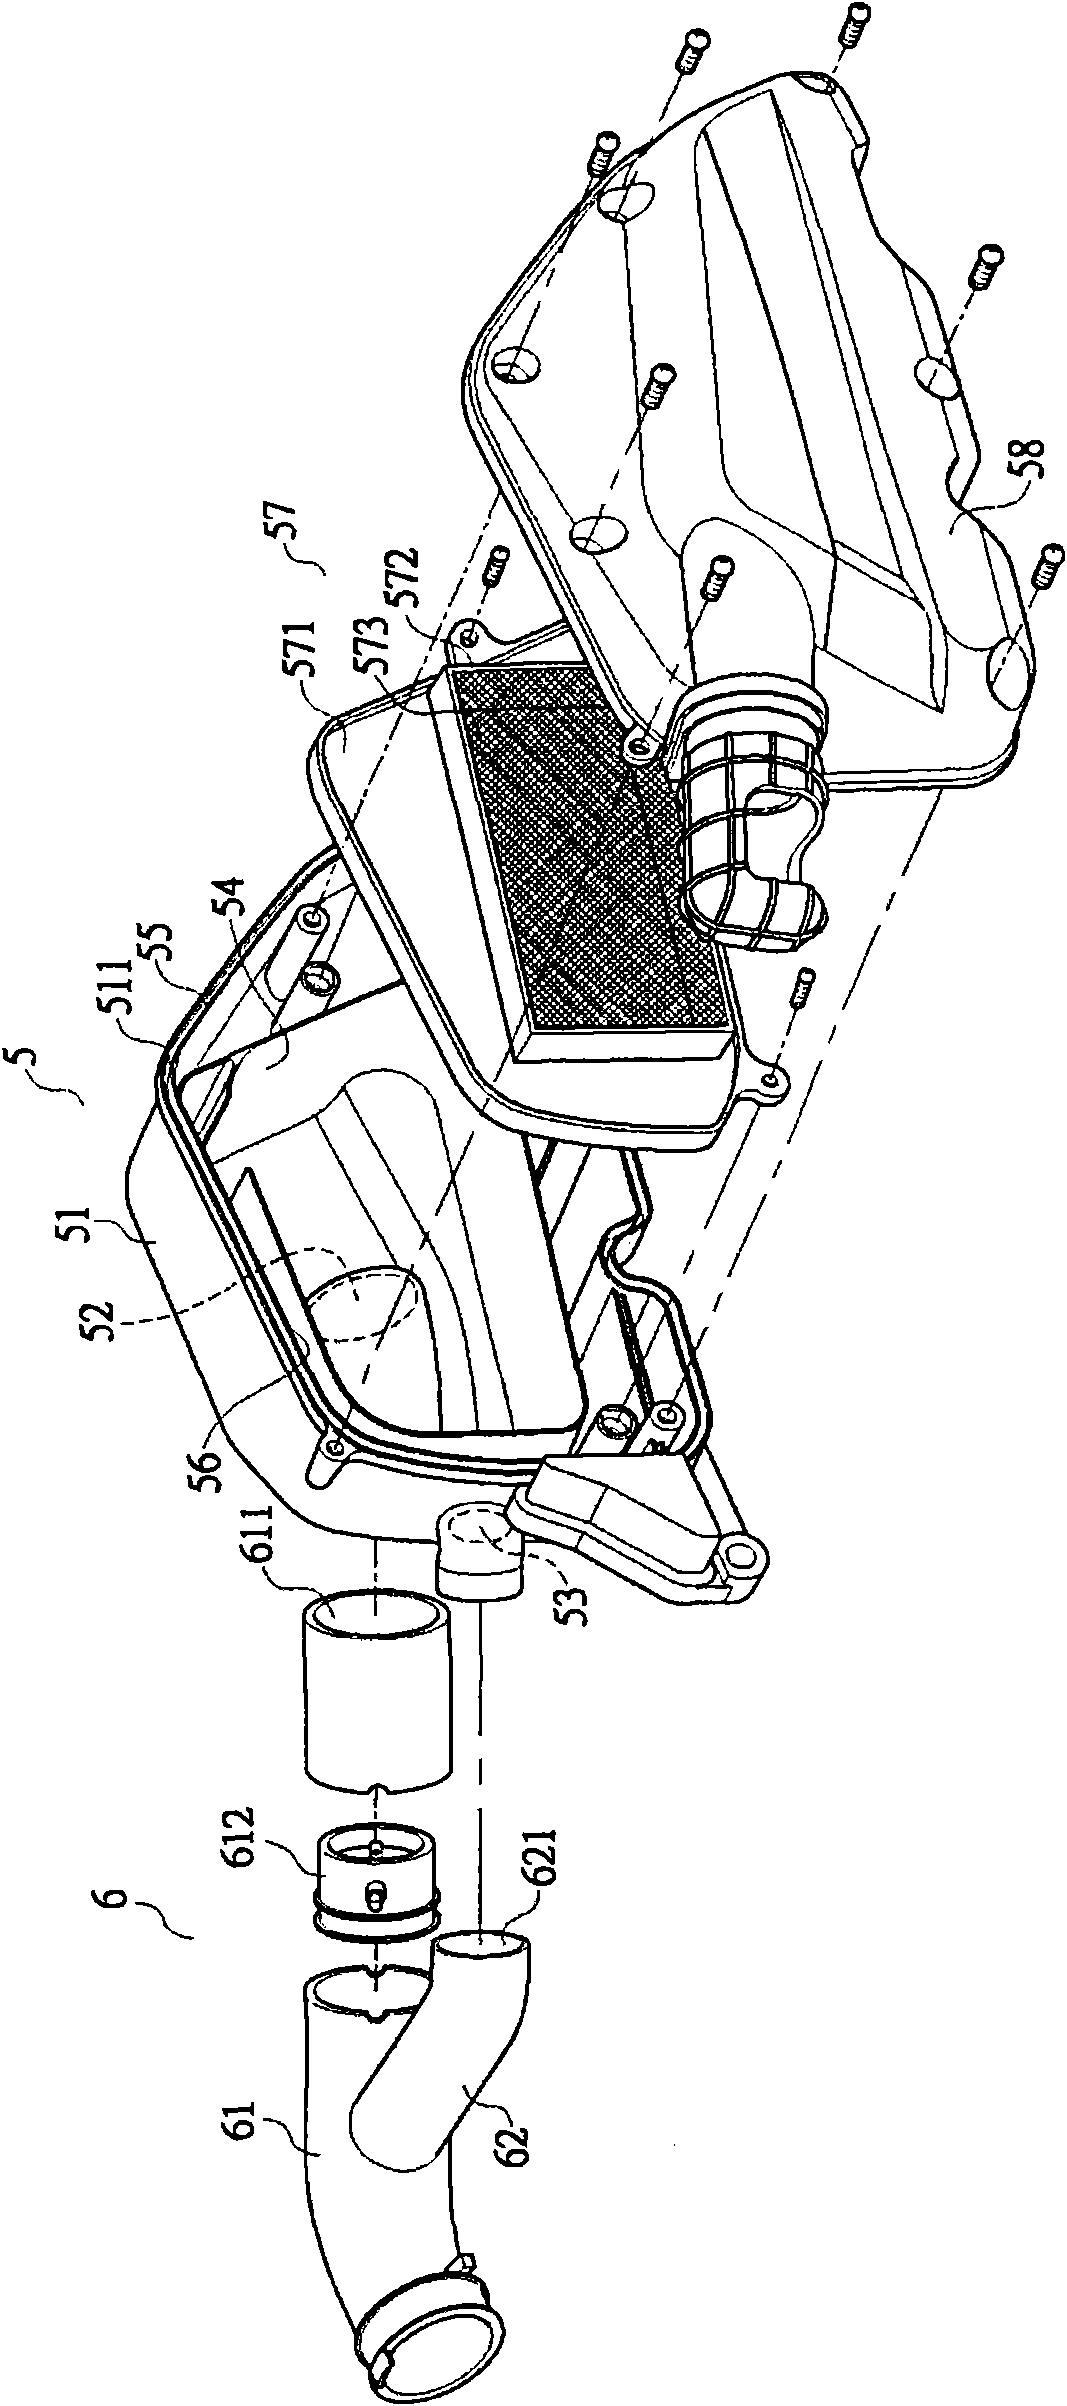 Variable air inflow structure of engine